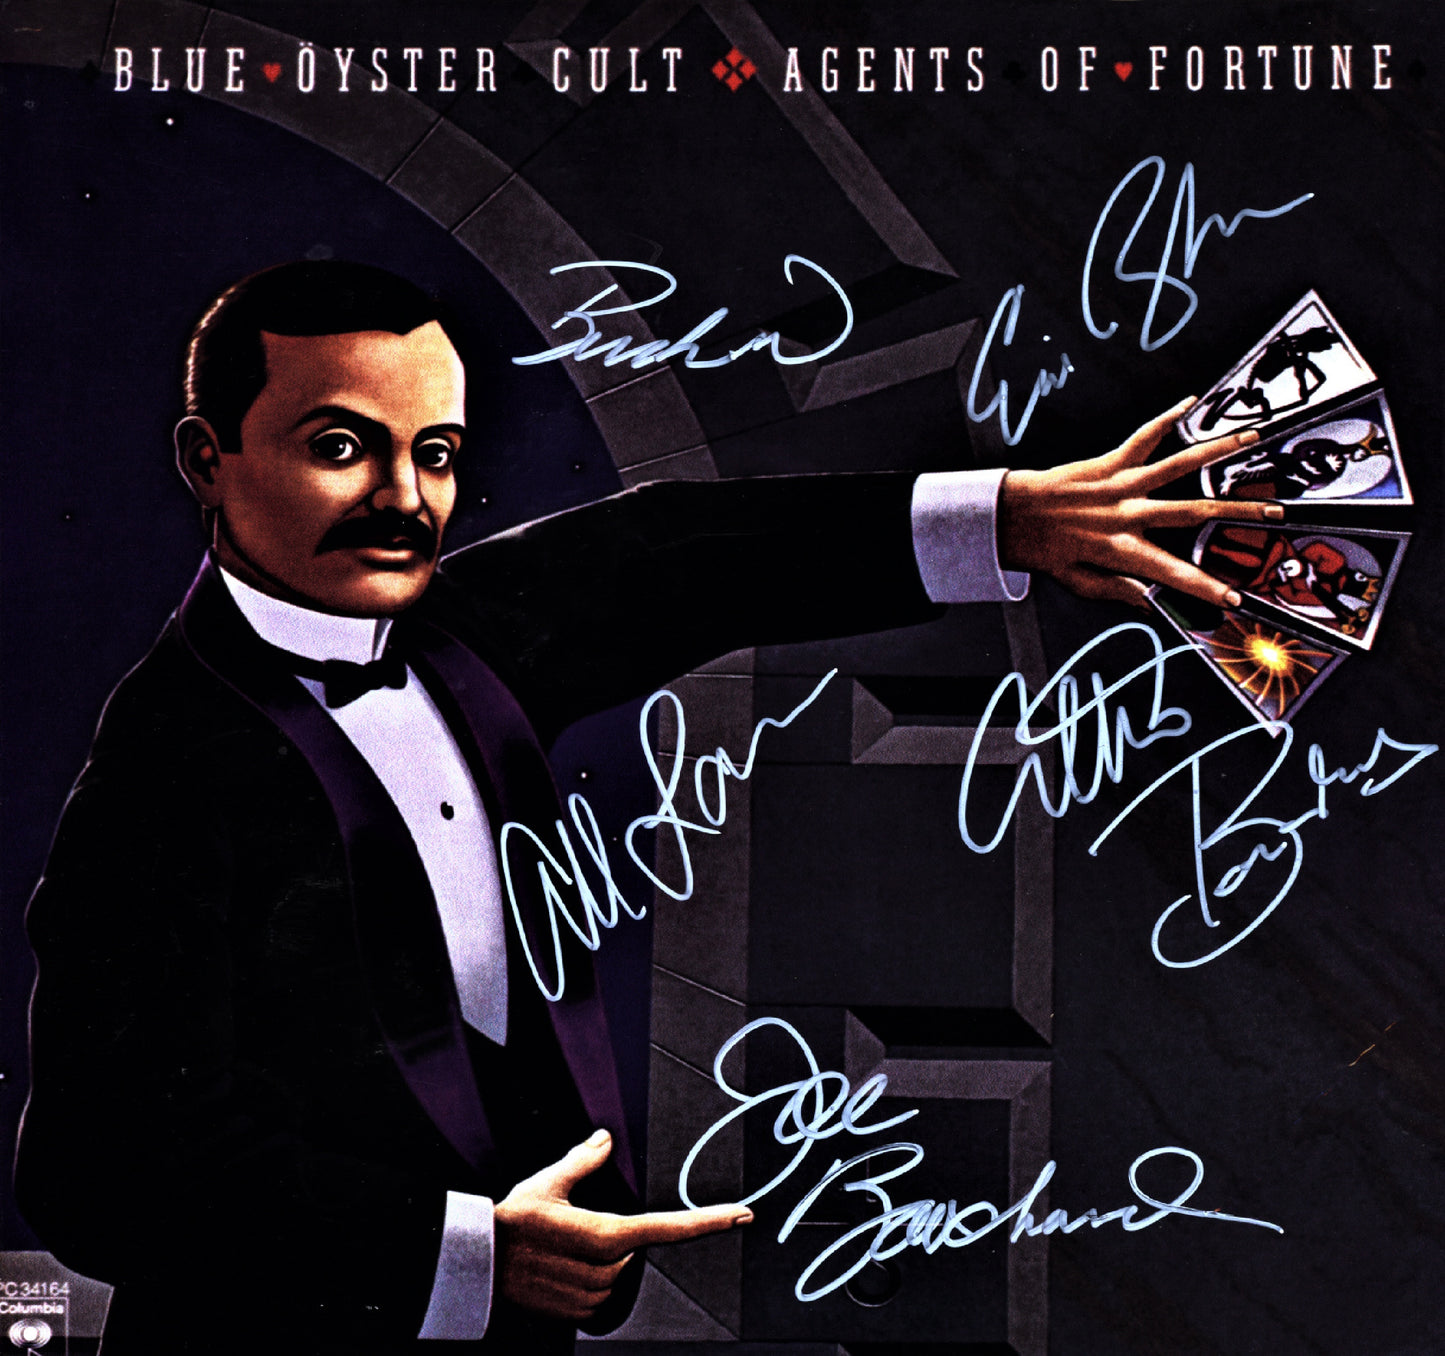 Blue Oyster Cult Autographed LP - Zion Graphic Collectibles